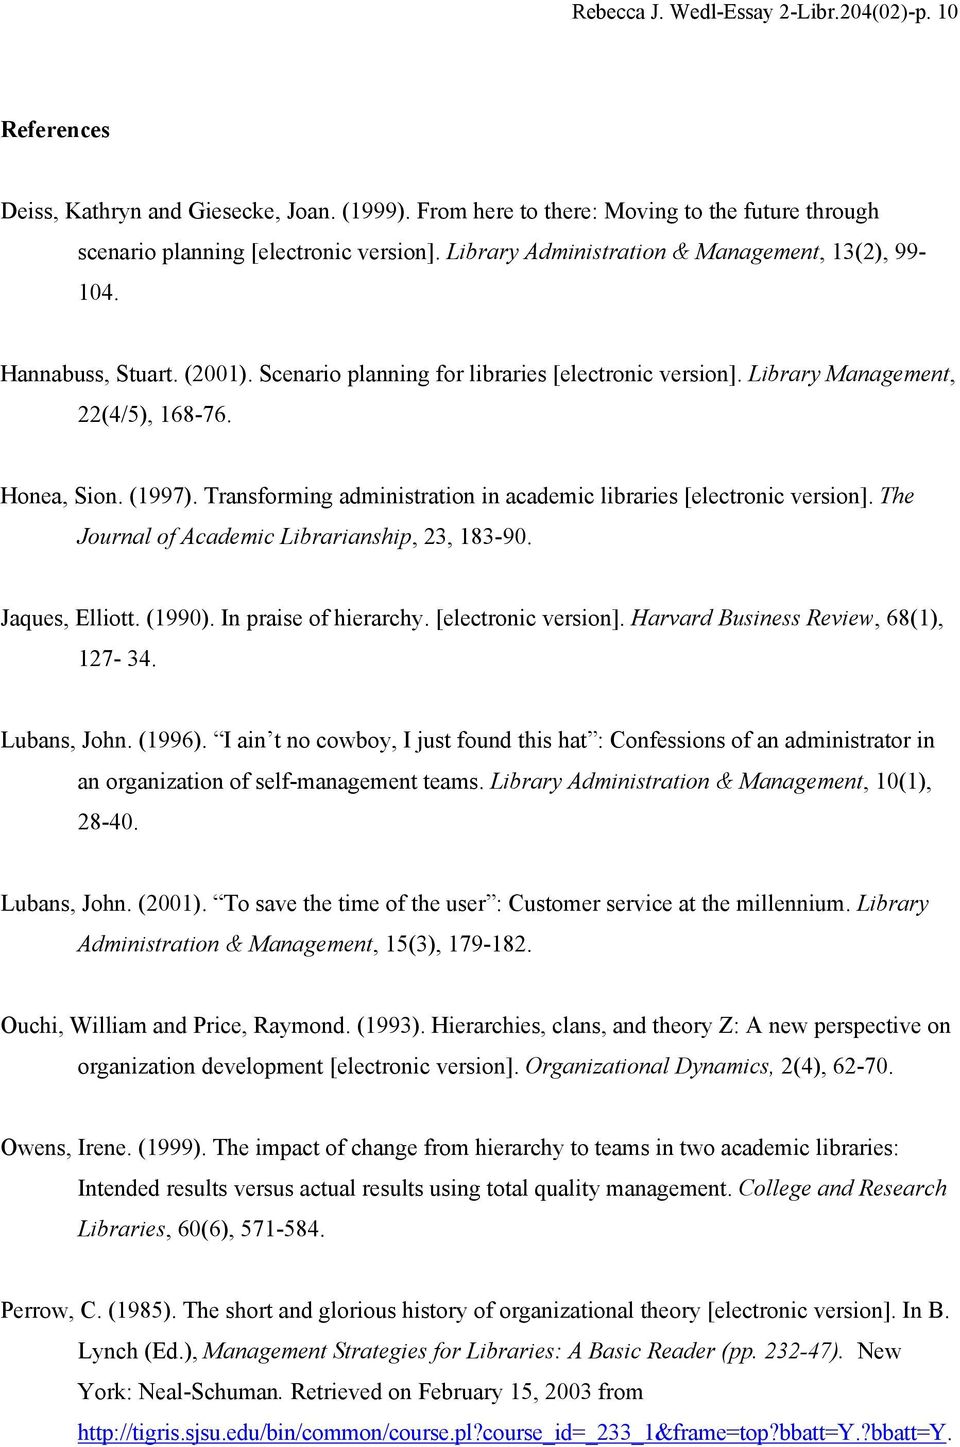 Transforming administration in academic libraries [electronic version]. The Journal of Academic Librarianship, 23, 183-90. Jaques, Elliott. (1990). In praise of hierarchy. [electronic version]. Harvard Business Review, 68(1), 127-34.